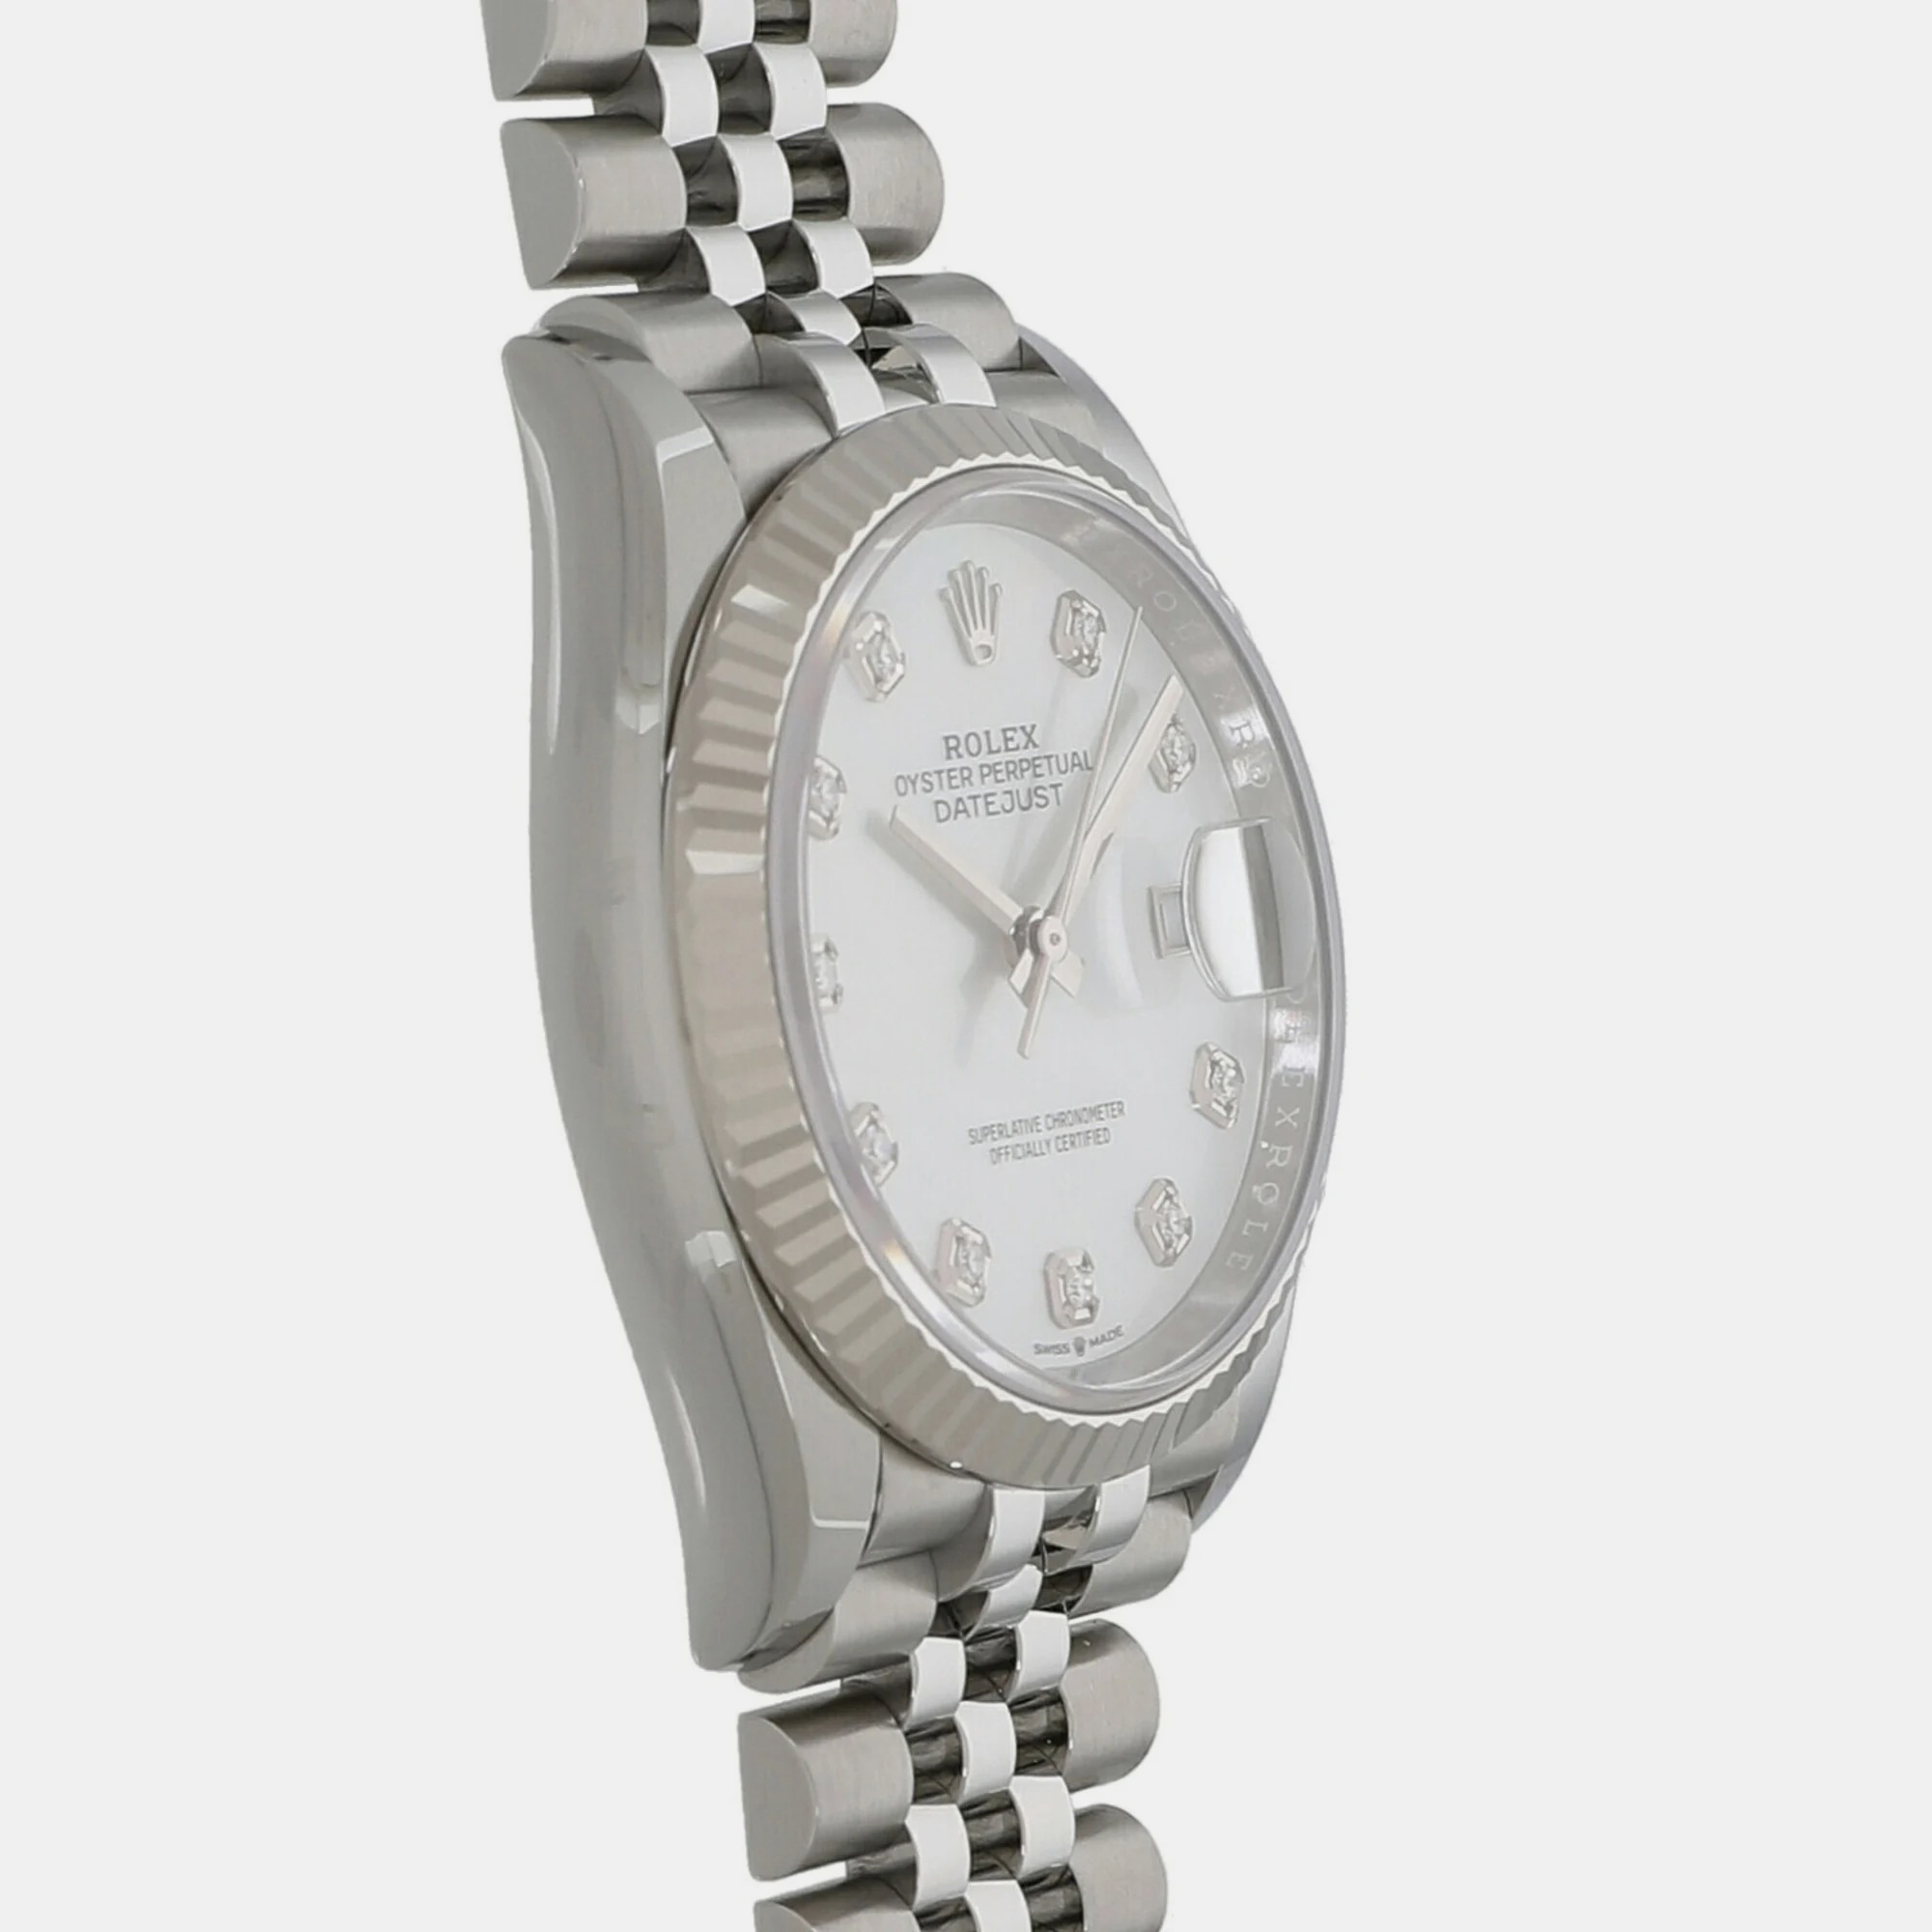 Rolex White Shell 18k White Gold And Stainless Steel Datejust 126234 Automatic Men's Wristwatch 36 Mm